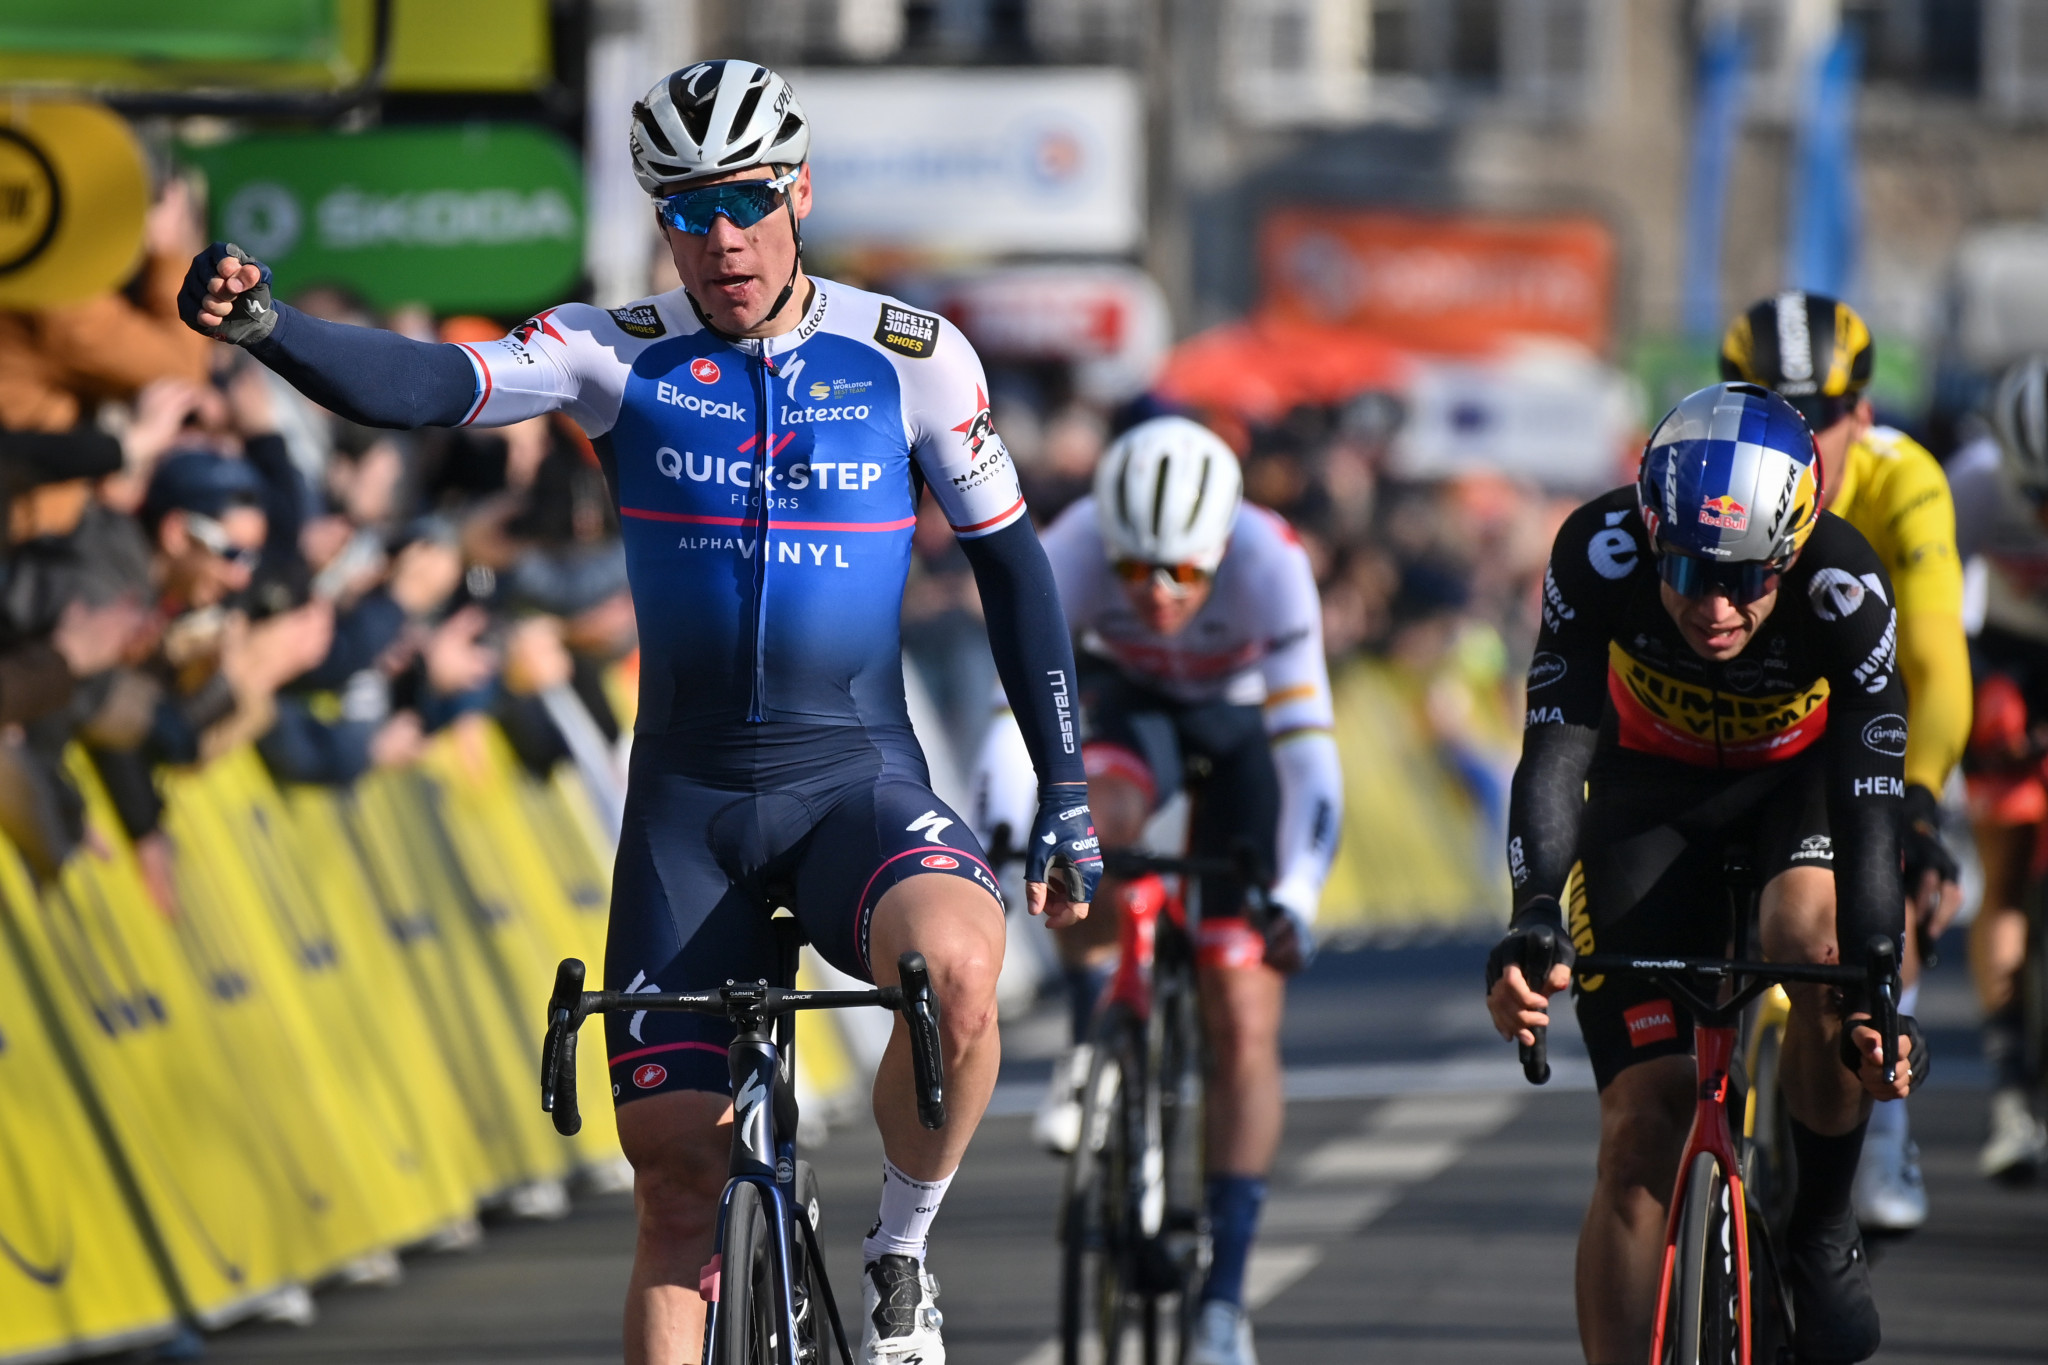 The Netherlands' Fabio Jakobsen sprinted to victory on stage two of Paris-Nice ©Getty Images